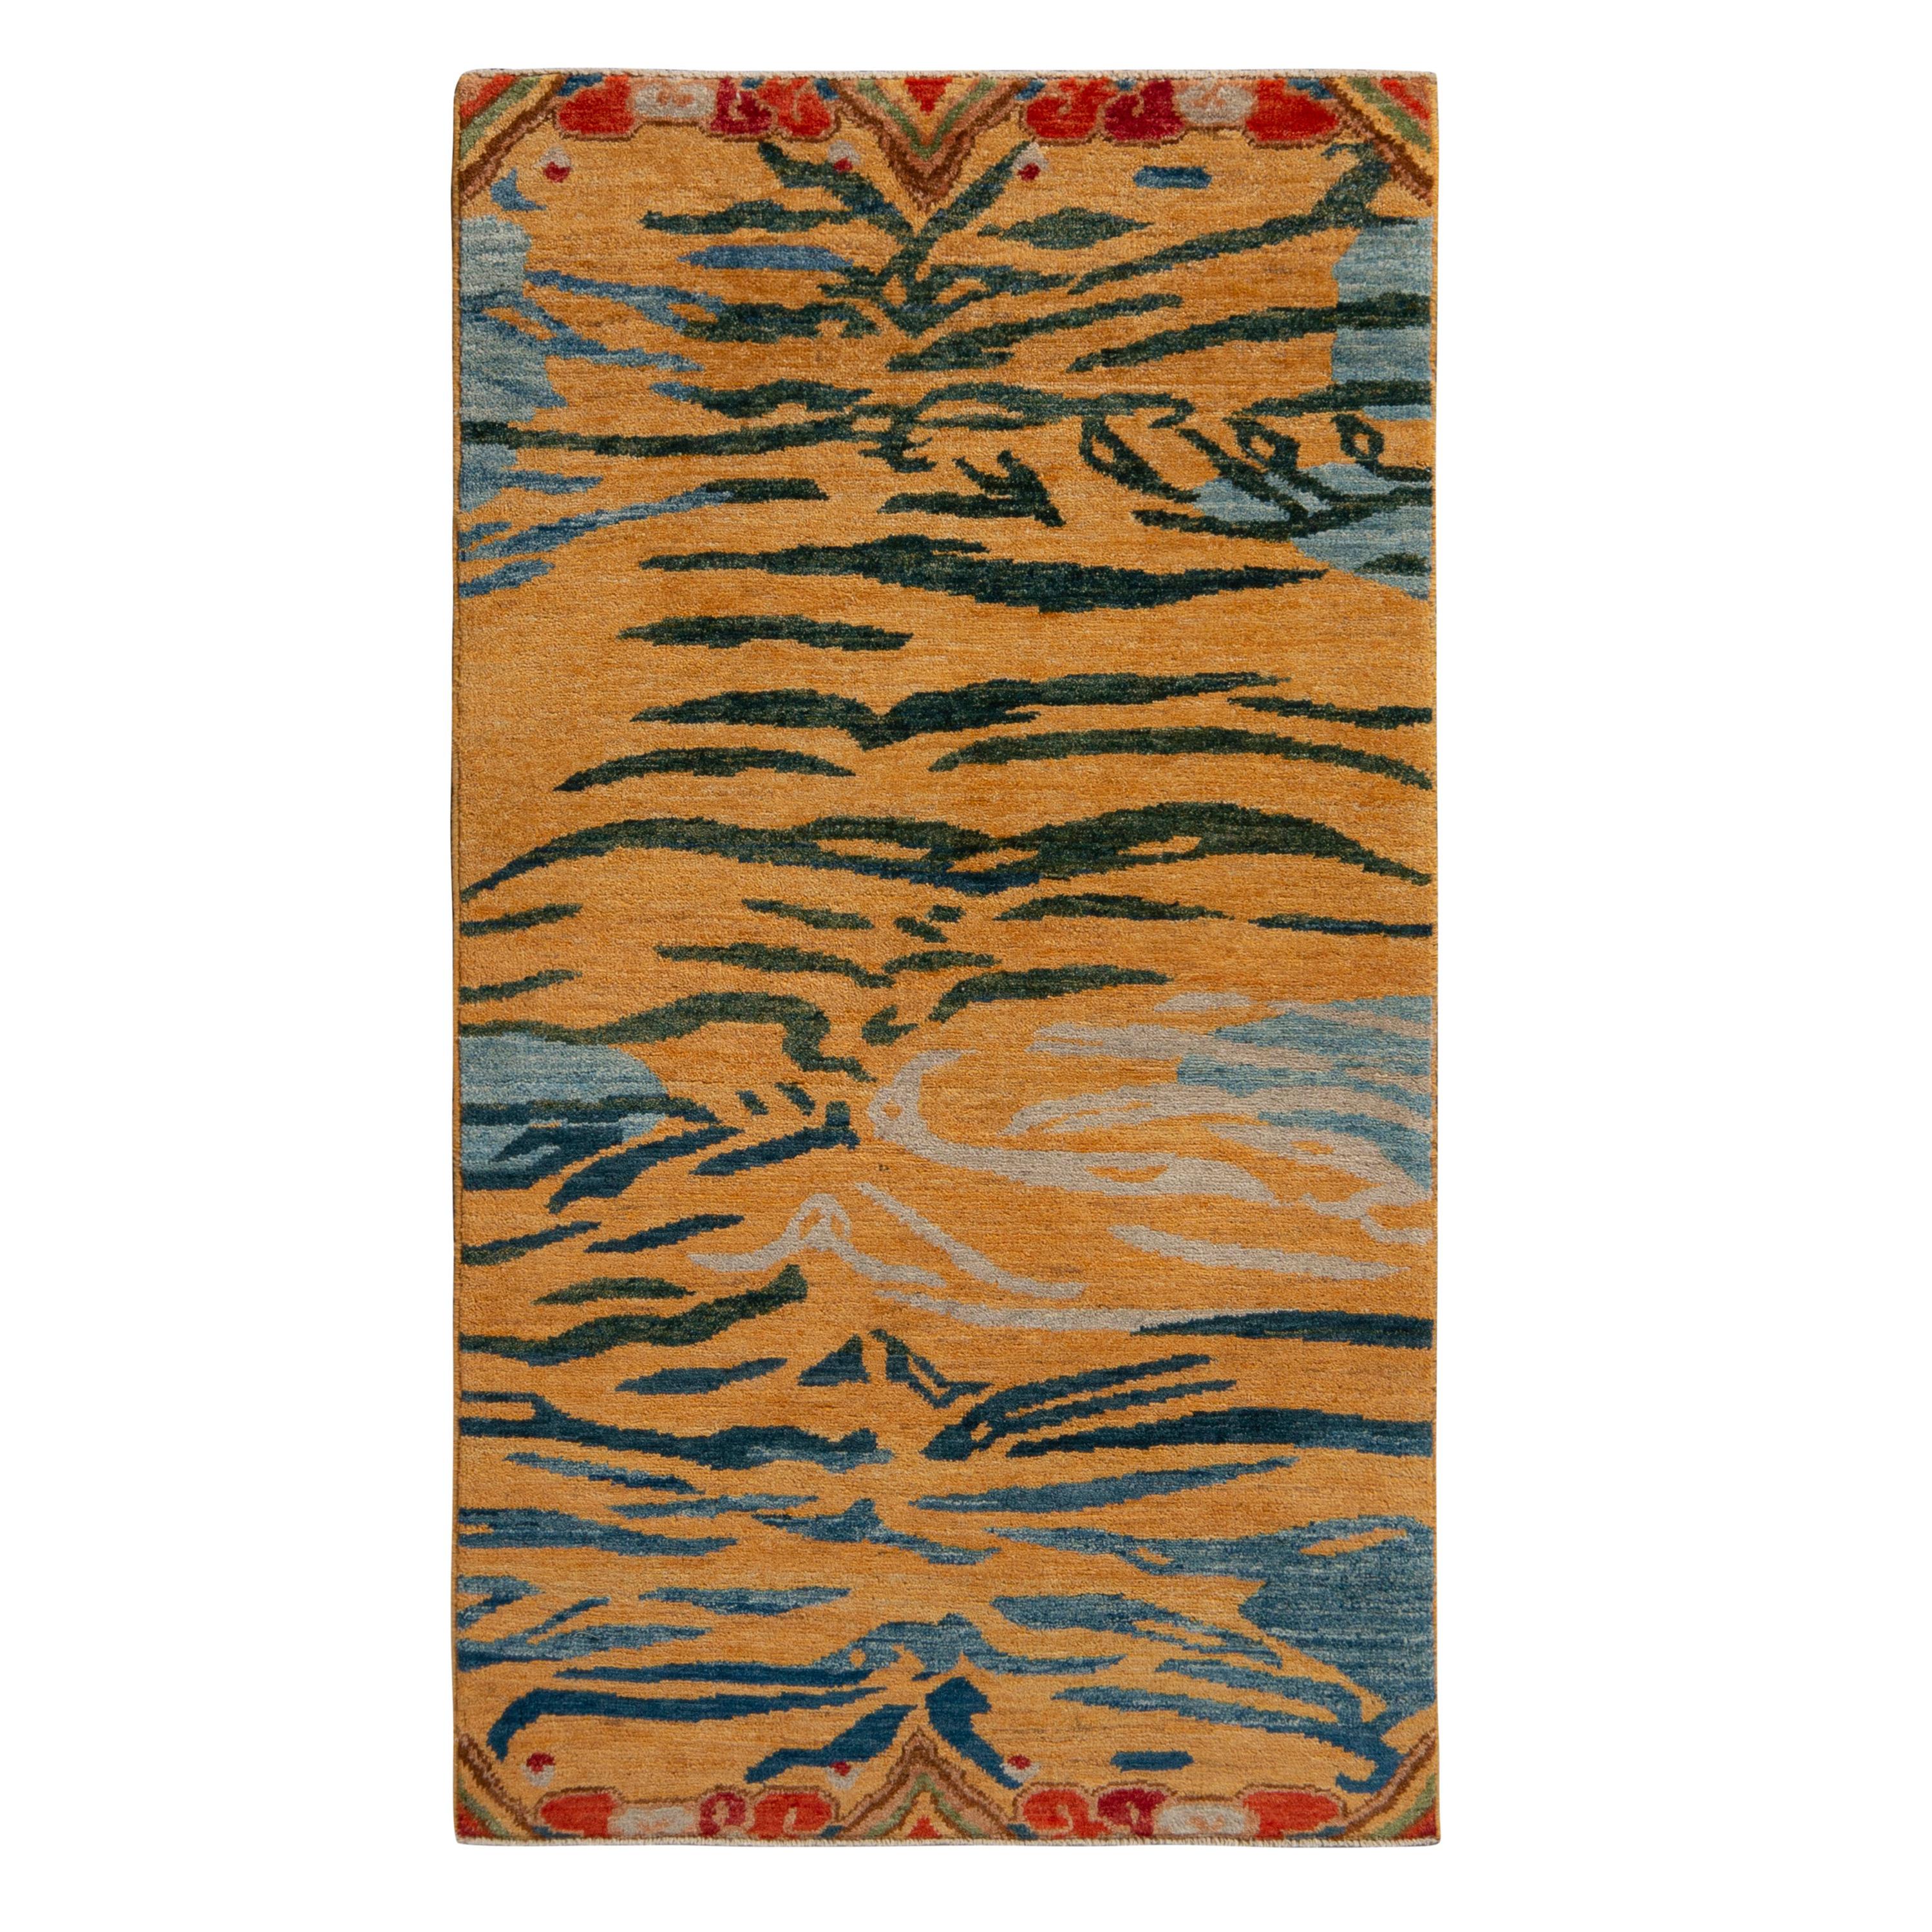 Rug & Kilim’s Classic Style Tiger Rug in Orange and Blue Abstract Stripe Pattern